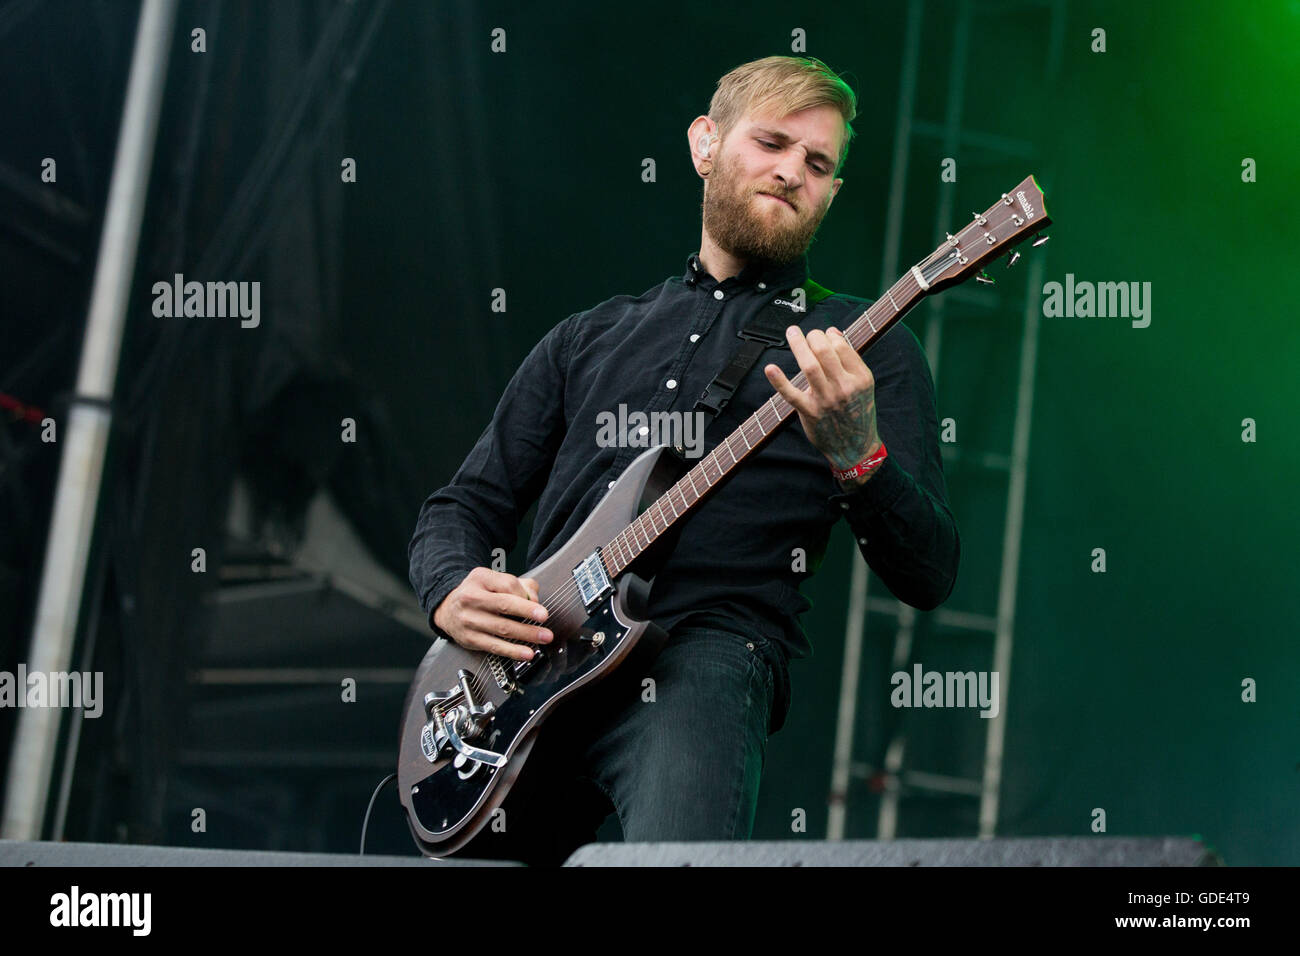 Chicago, Illinois, USA. 15th July, 2016. Guitarist KYLE SIPRESS of The  Devil Wears Prada performs live at Toyota Park during Chicago Open Air  Music Festival in Chicago, Illinois Credit: Daniel DeSlover/ZUMA Wire/Alamy